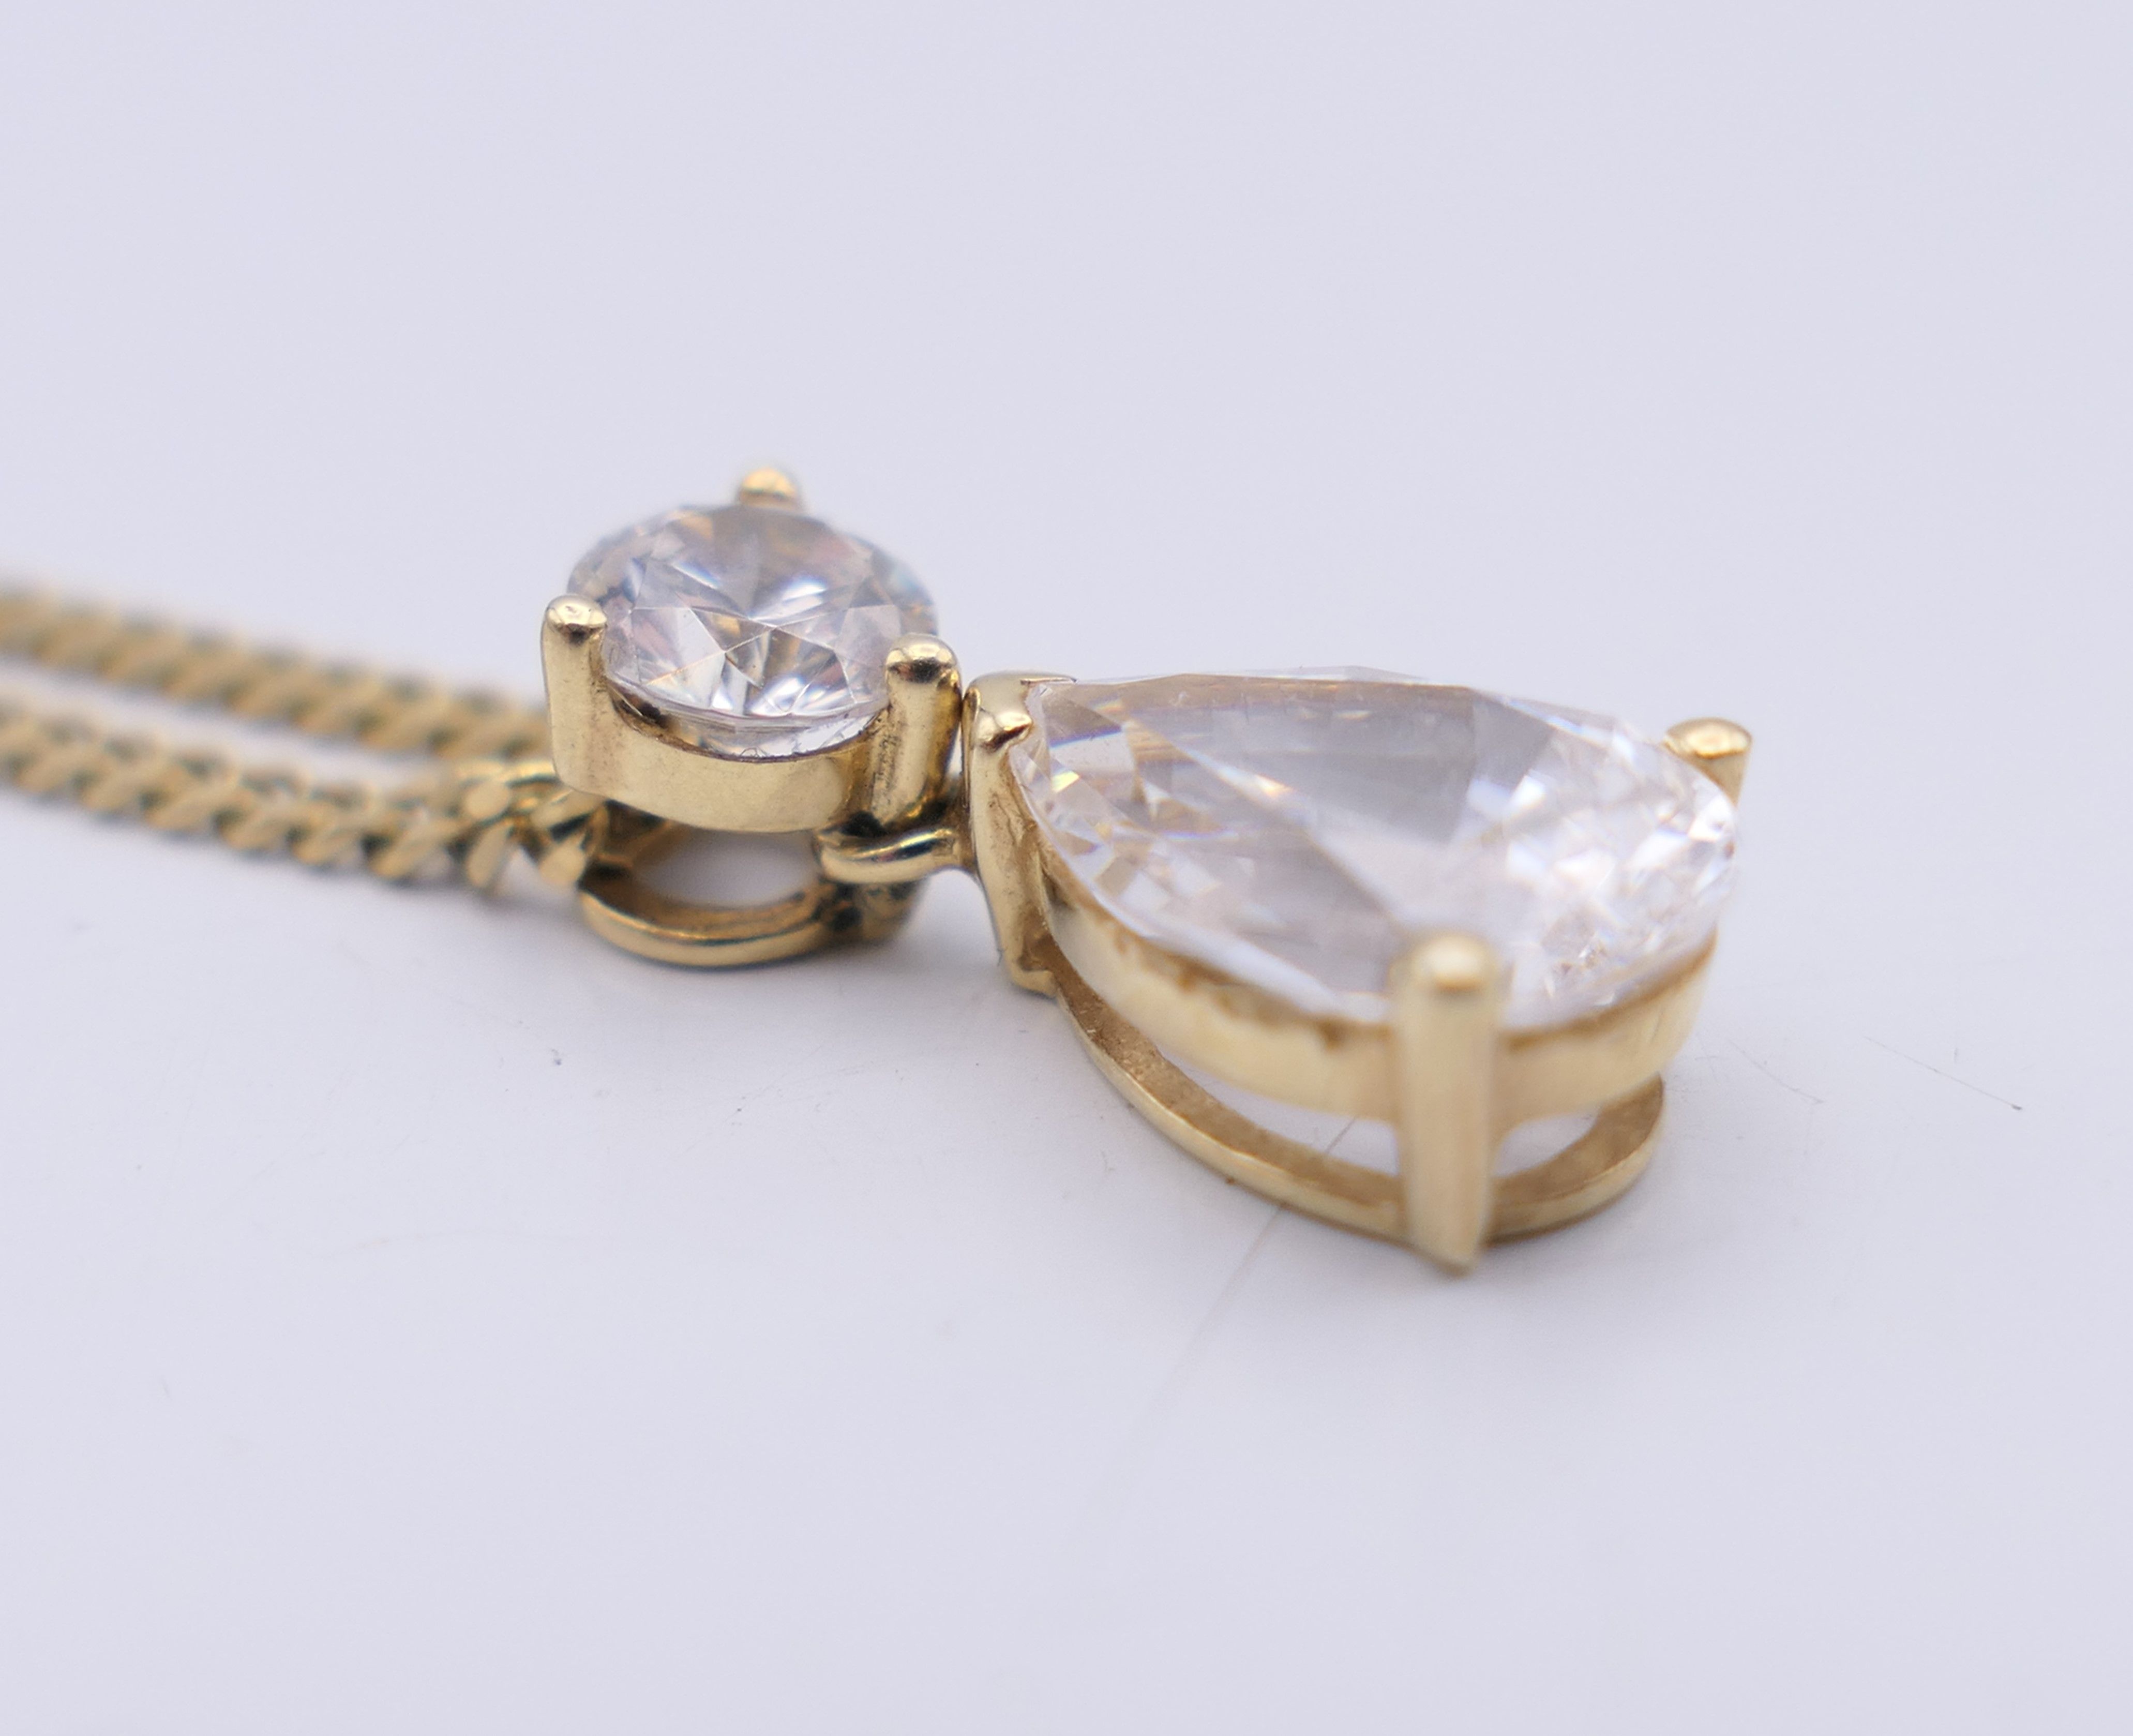 A 14 K gold two stone pendant necklace. Chain 44 cm long, pendant 1.5 cm high. 5. - Image 3 of 5